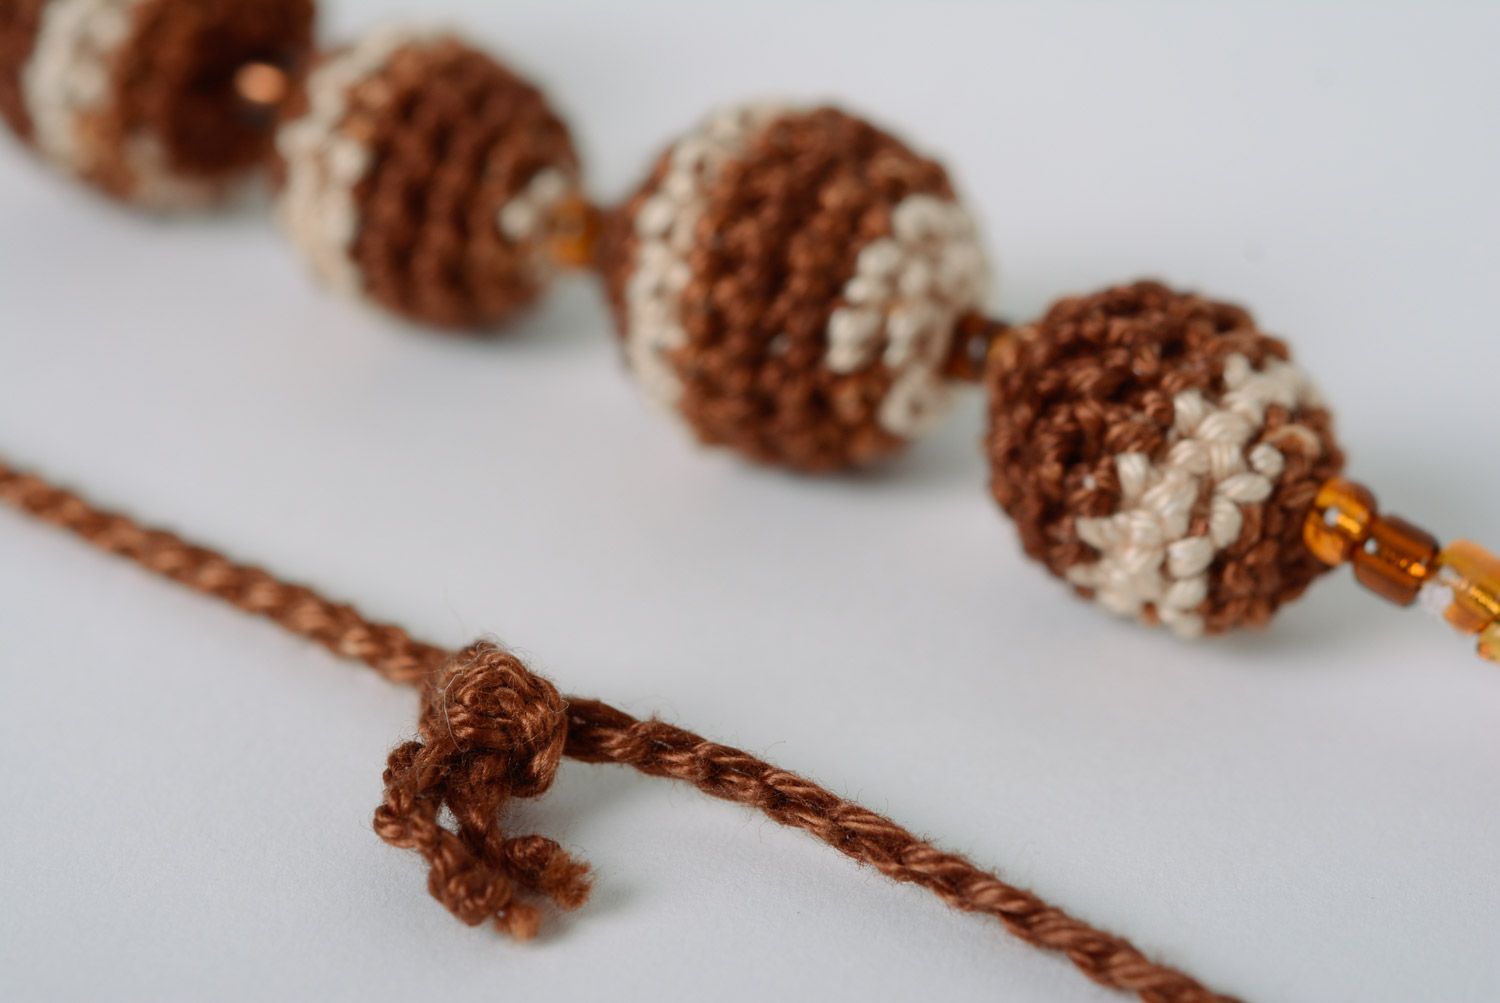 Handmade teething bead necklace crocheted of cotton threads of chocolate color photo 4